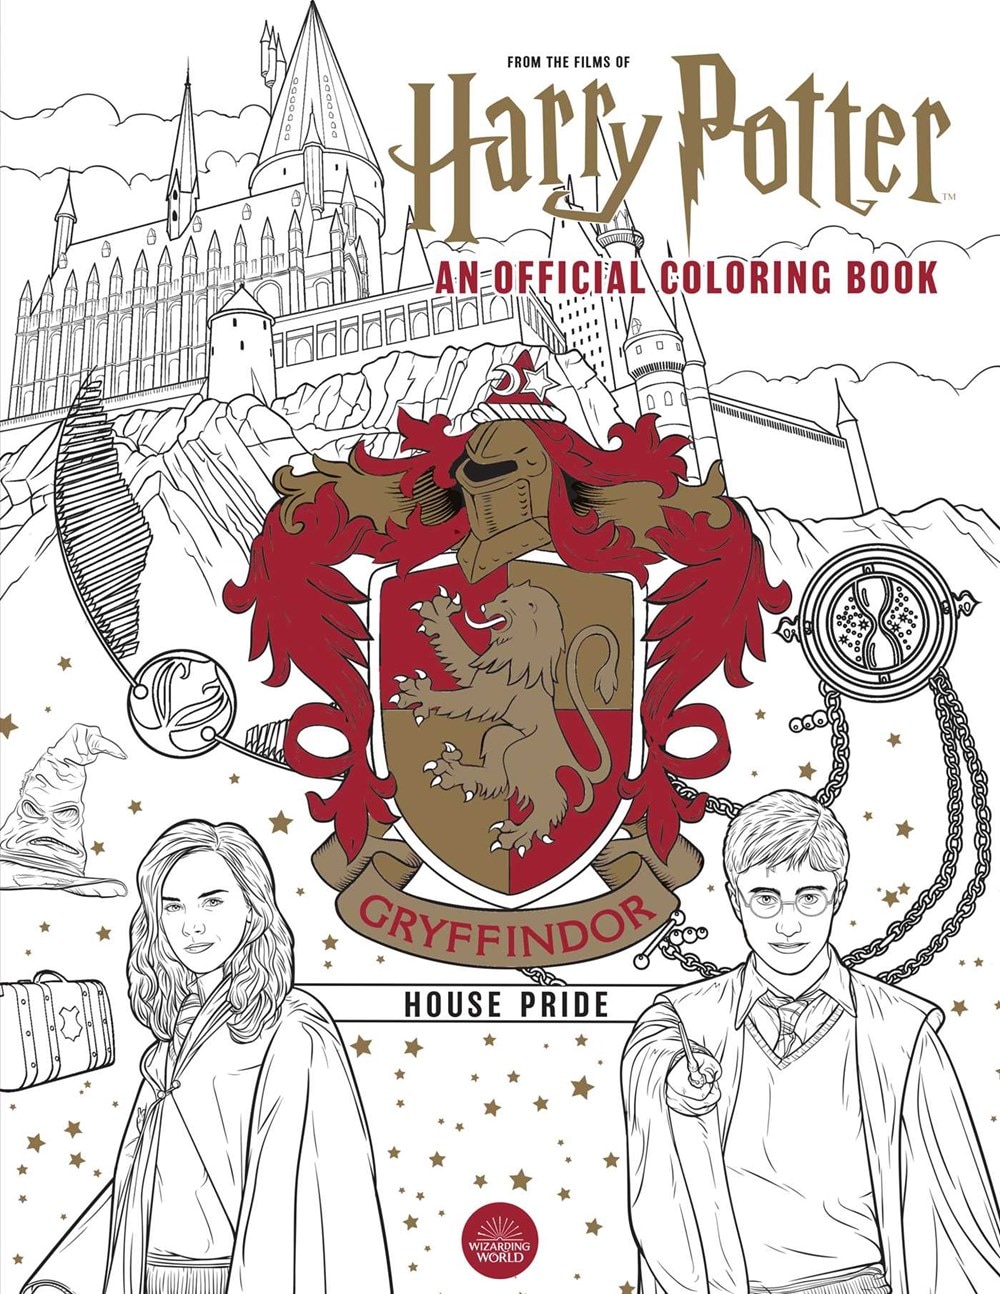 Harry Potter: Gryffindor House Pride: The Official Coloring Book: (Gifts Books for Harry Potter Fans  Adult Coloring Books)